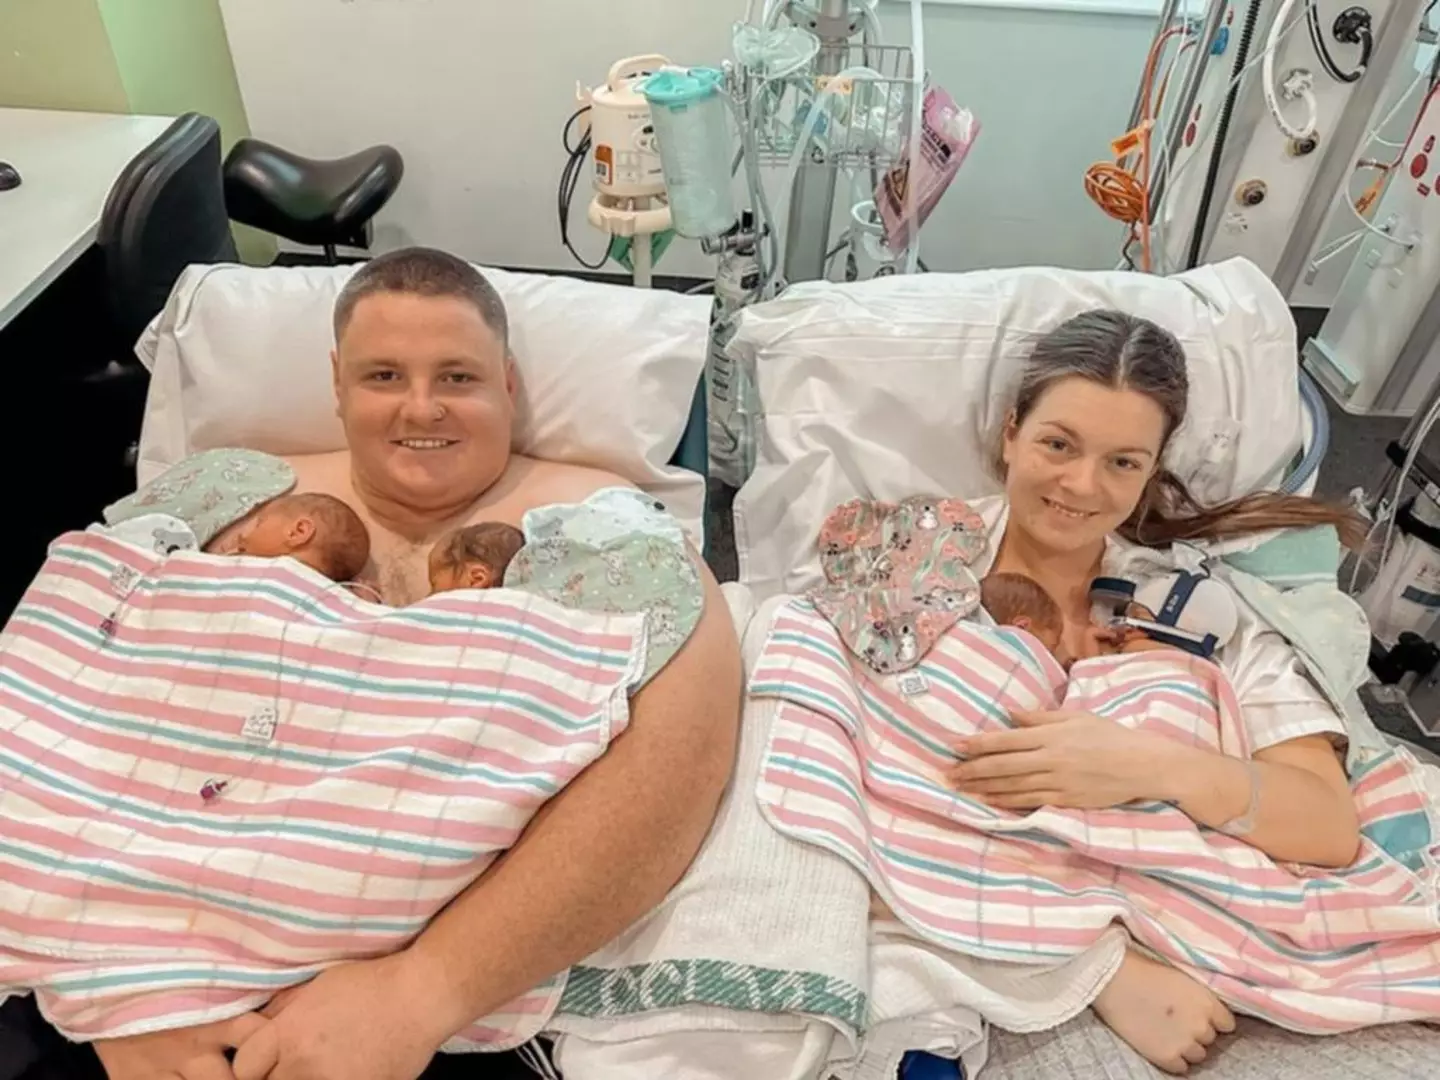 The couple welcomed three boys and a girl into the world on 7 December.